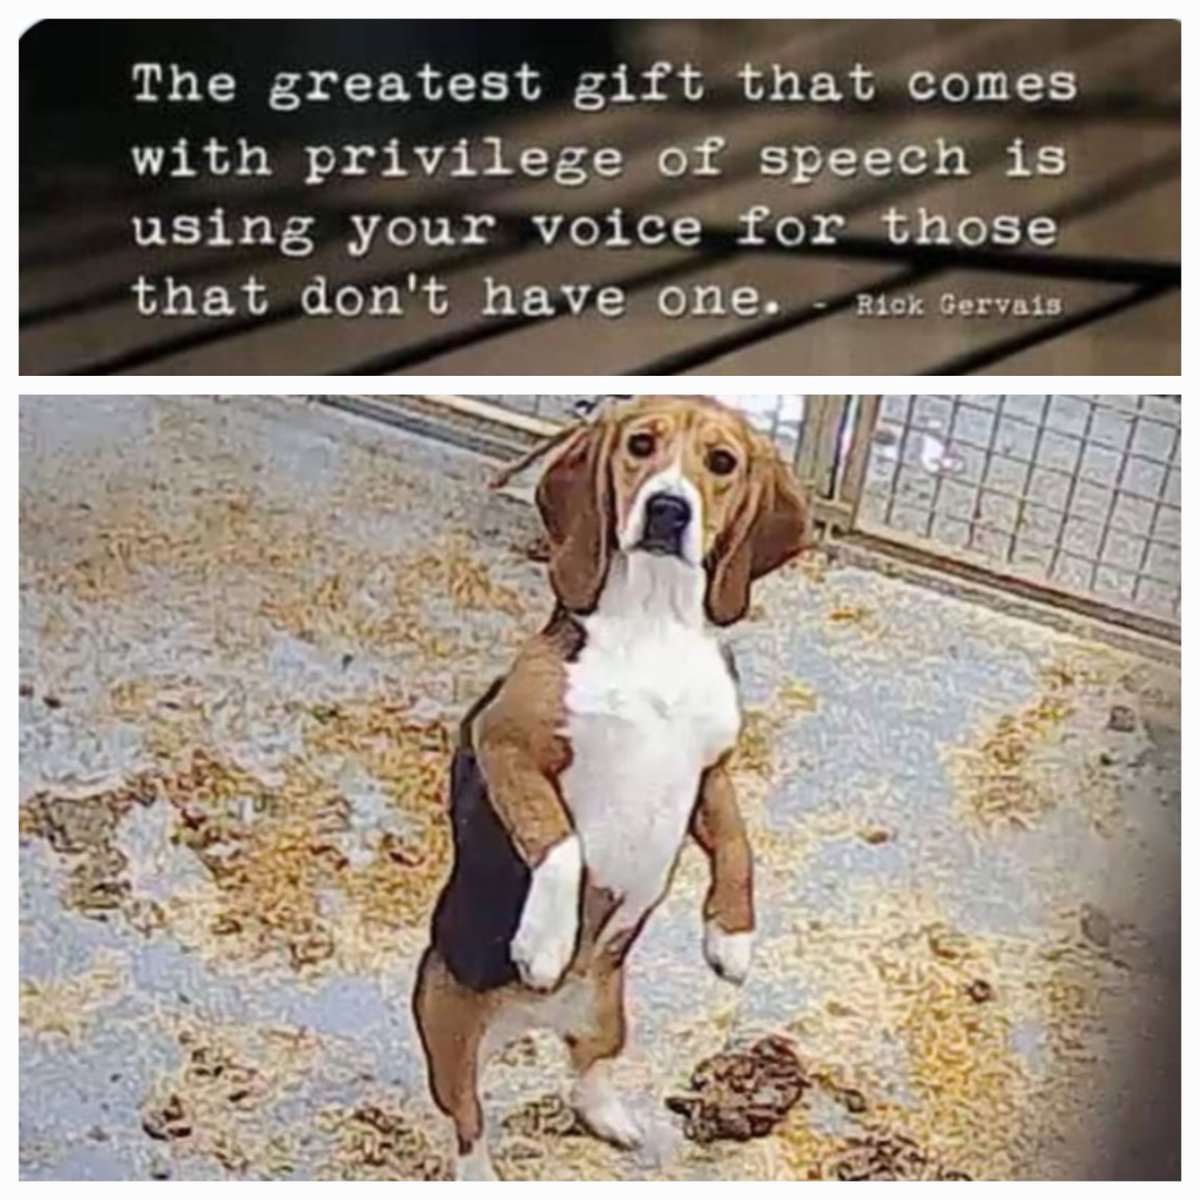 @thepupmommy Couldn't agree more. Dogs are my life. That's why I am fighting against animal testing everday. It's unimaginable horrific for me that they are breed to be tortured and murdered.